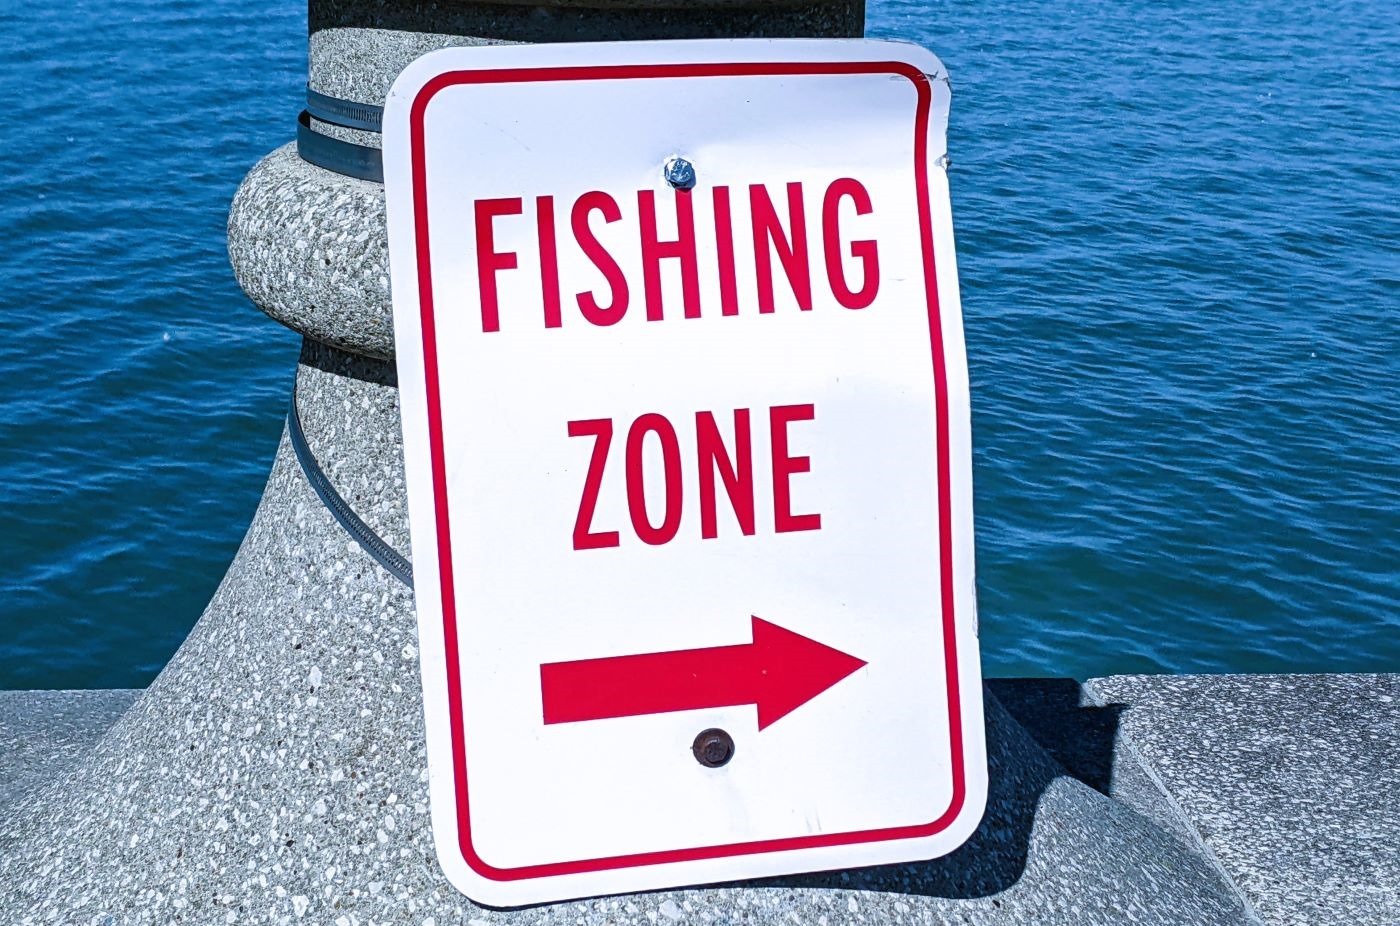 Fishing Zone sign in Cleveland Lake Erie